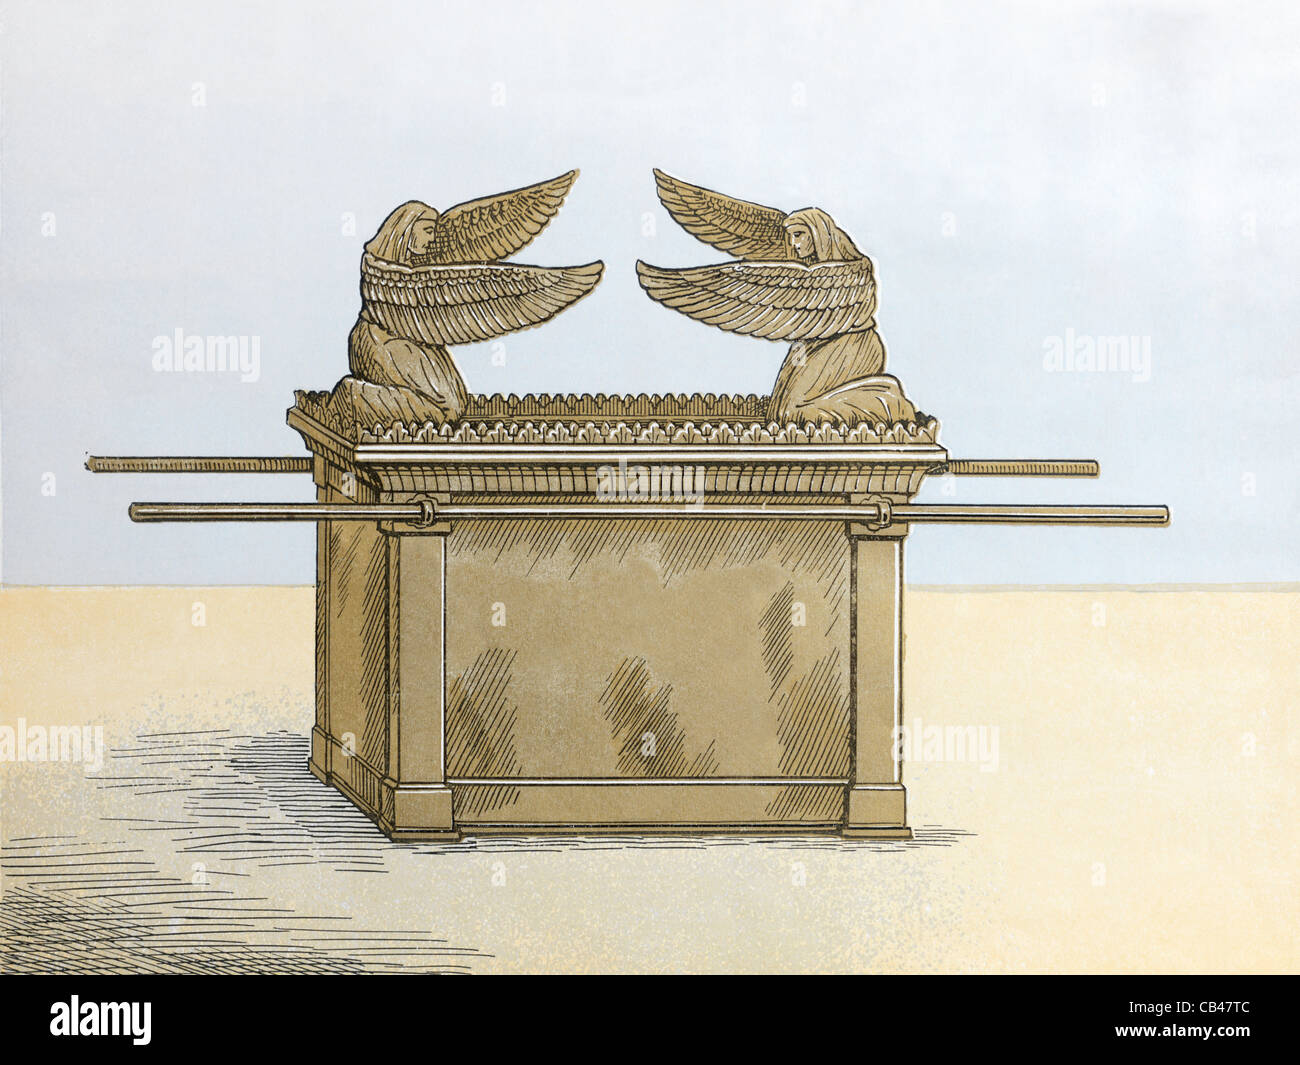 An Illustration Of The Ark Of The Covenant (Exodus XXV) From The Tabernacle In The Wilderness Stock Photo